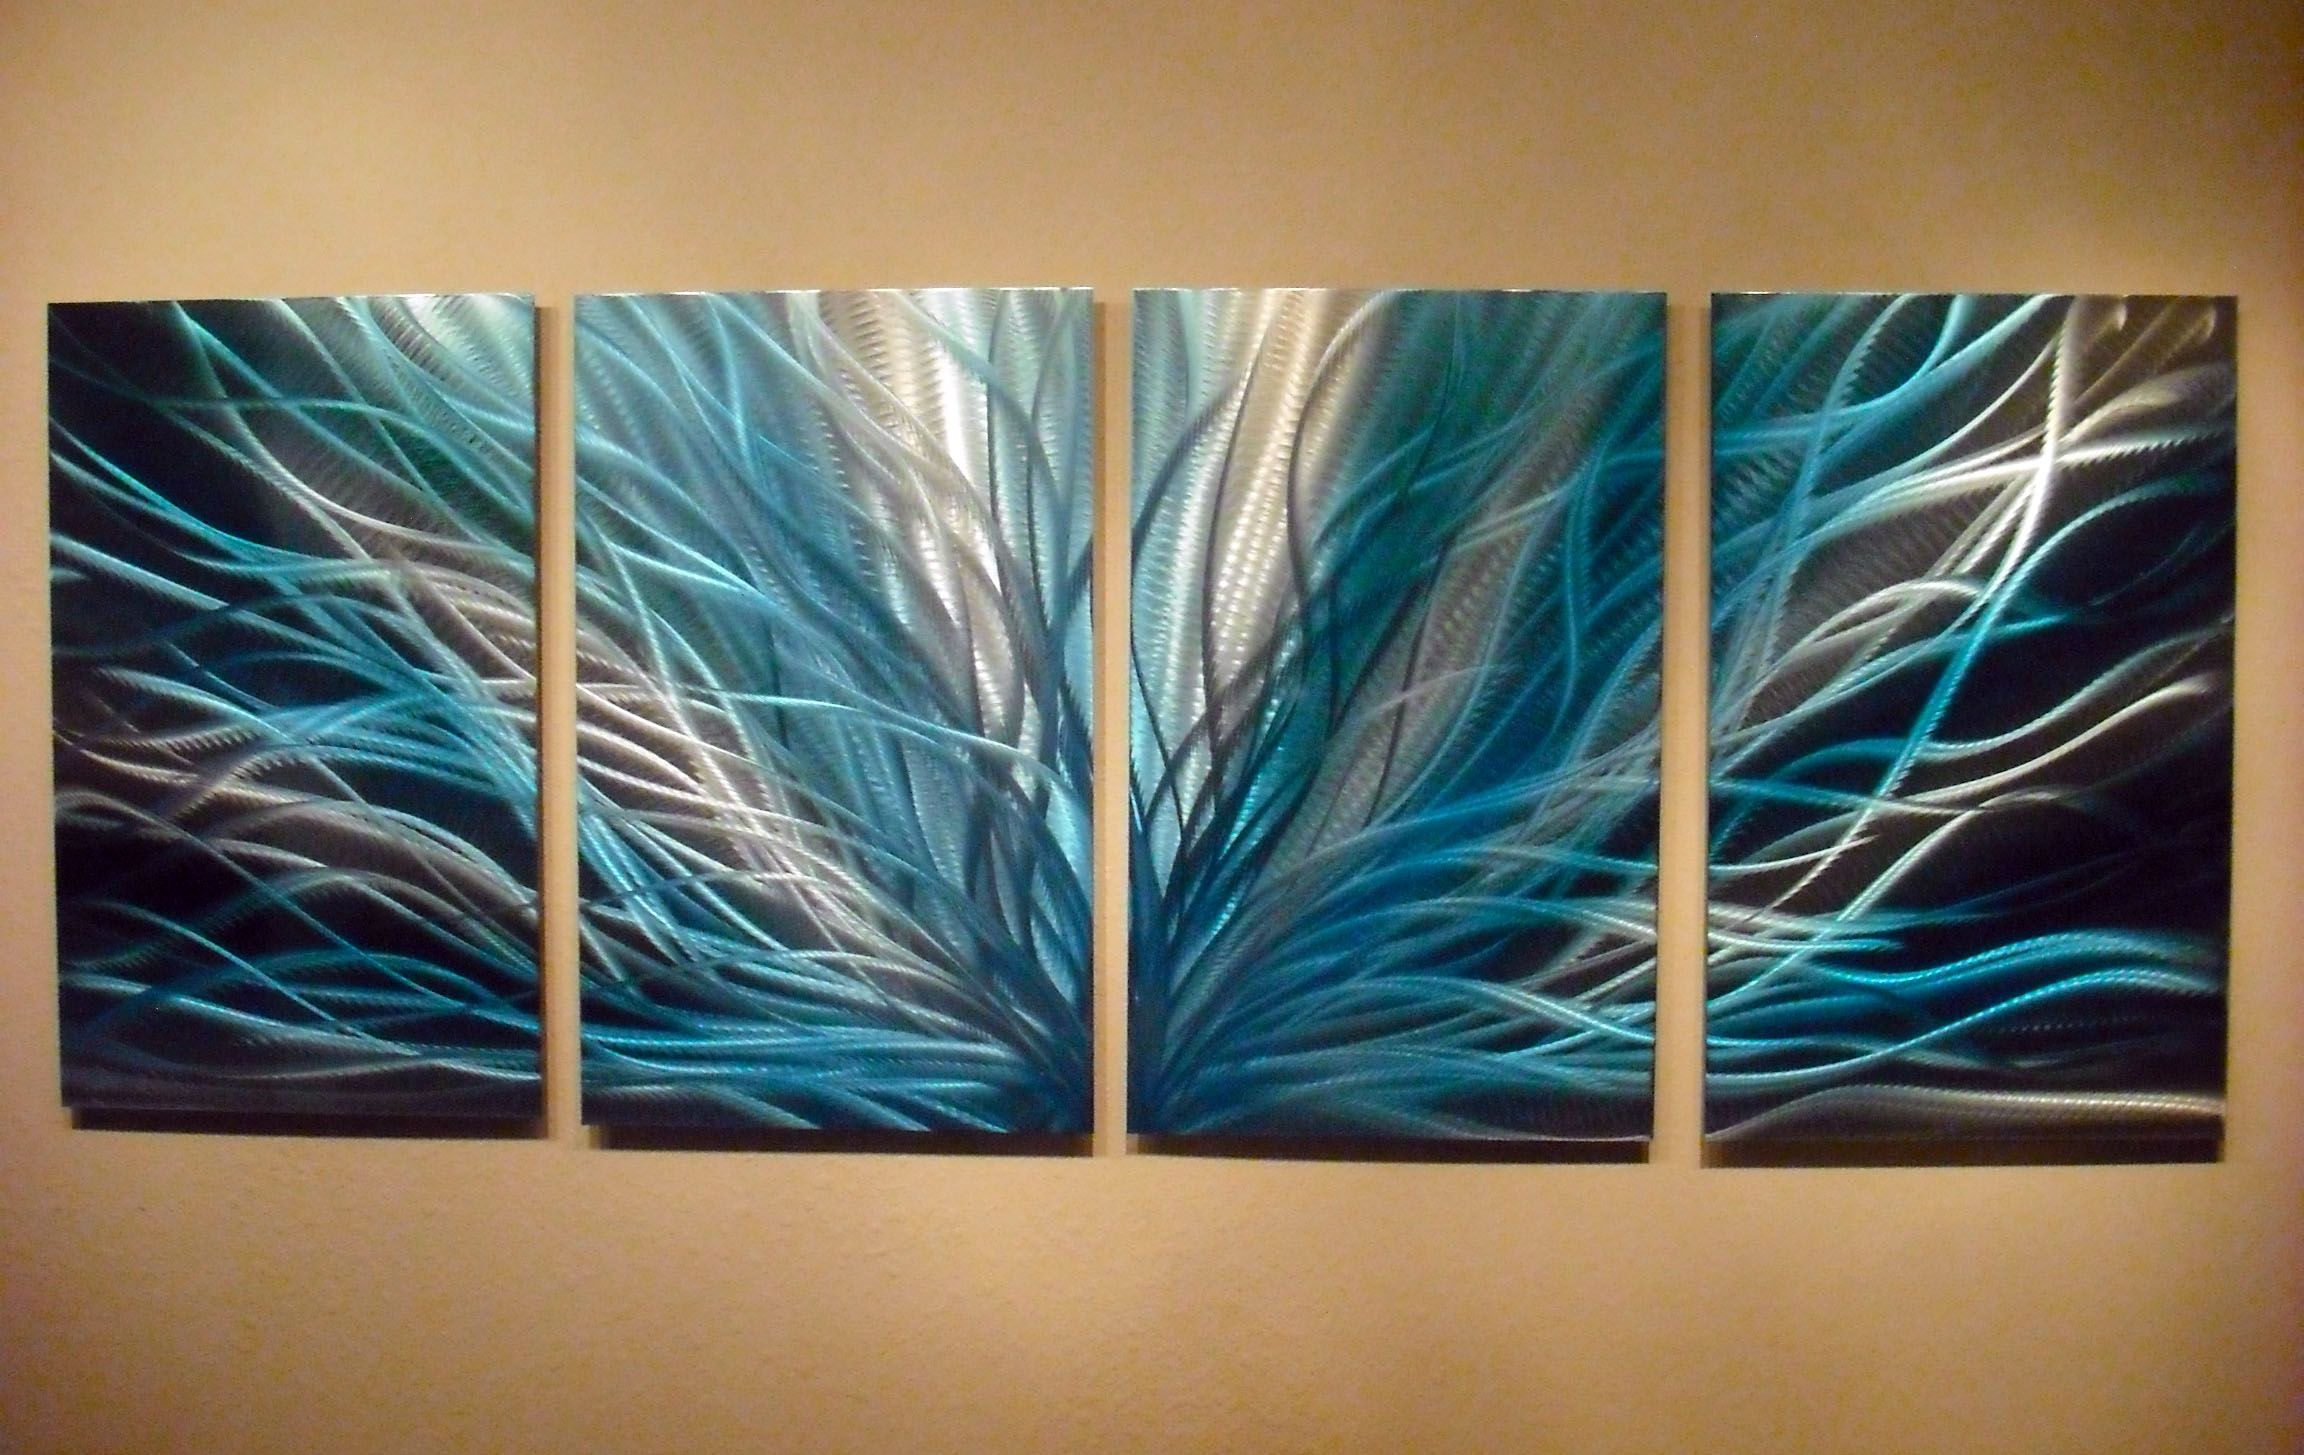 Turquoise Metal Wall Art Intended For Well Known Radiance In Blues  Abstract Metal Wall Art Contemporary Modern (View 4 of 15)